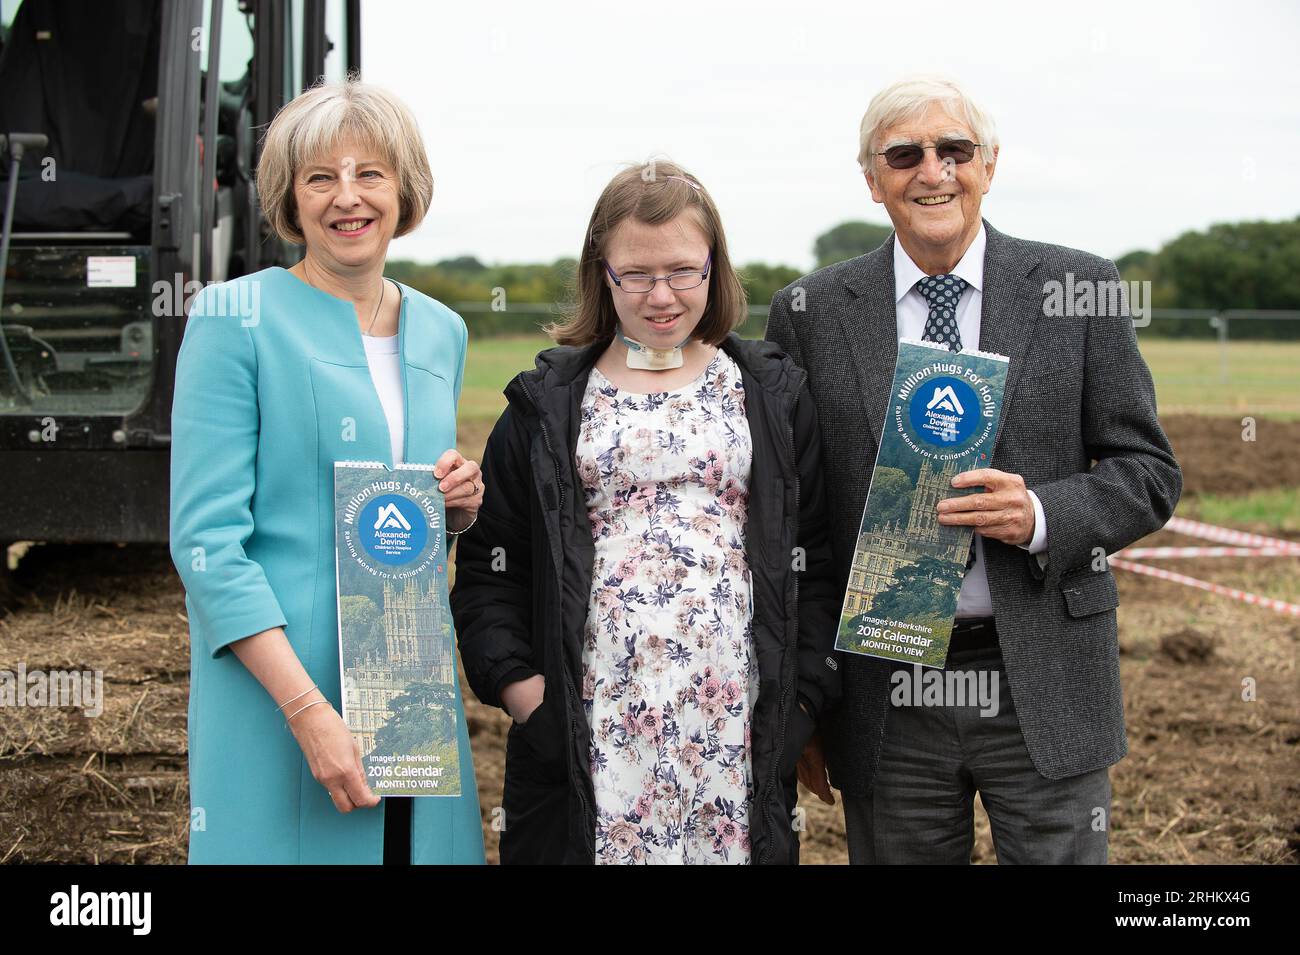 FILE PICS. 17th August, 2023. It has been announced today that sadly television host and presenter, Sir Michael Parkinson has died aged 88. Sir Michael Parkinson is pictured at the breaking the ground ceremony of the Alexander Divine Children's Hospice in Woodlands Park near Maidenhead, Berkshire with fundraiser Holly (M) and guest of honour The Rt Hon Theresa May (L) MP for Maidenhead. Credit: Maureen McLean/Alamy Stock Photo